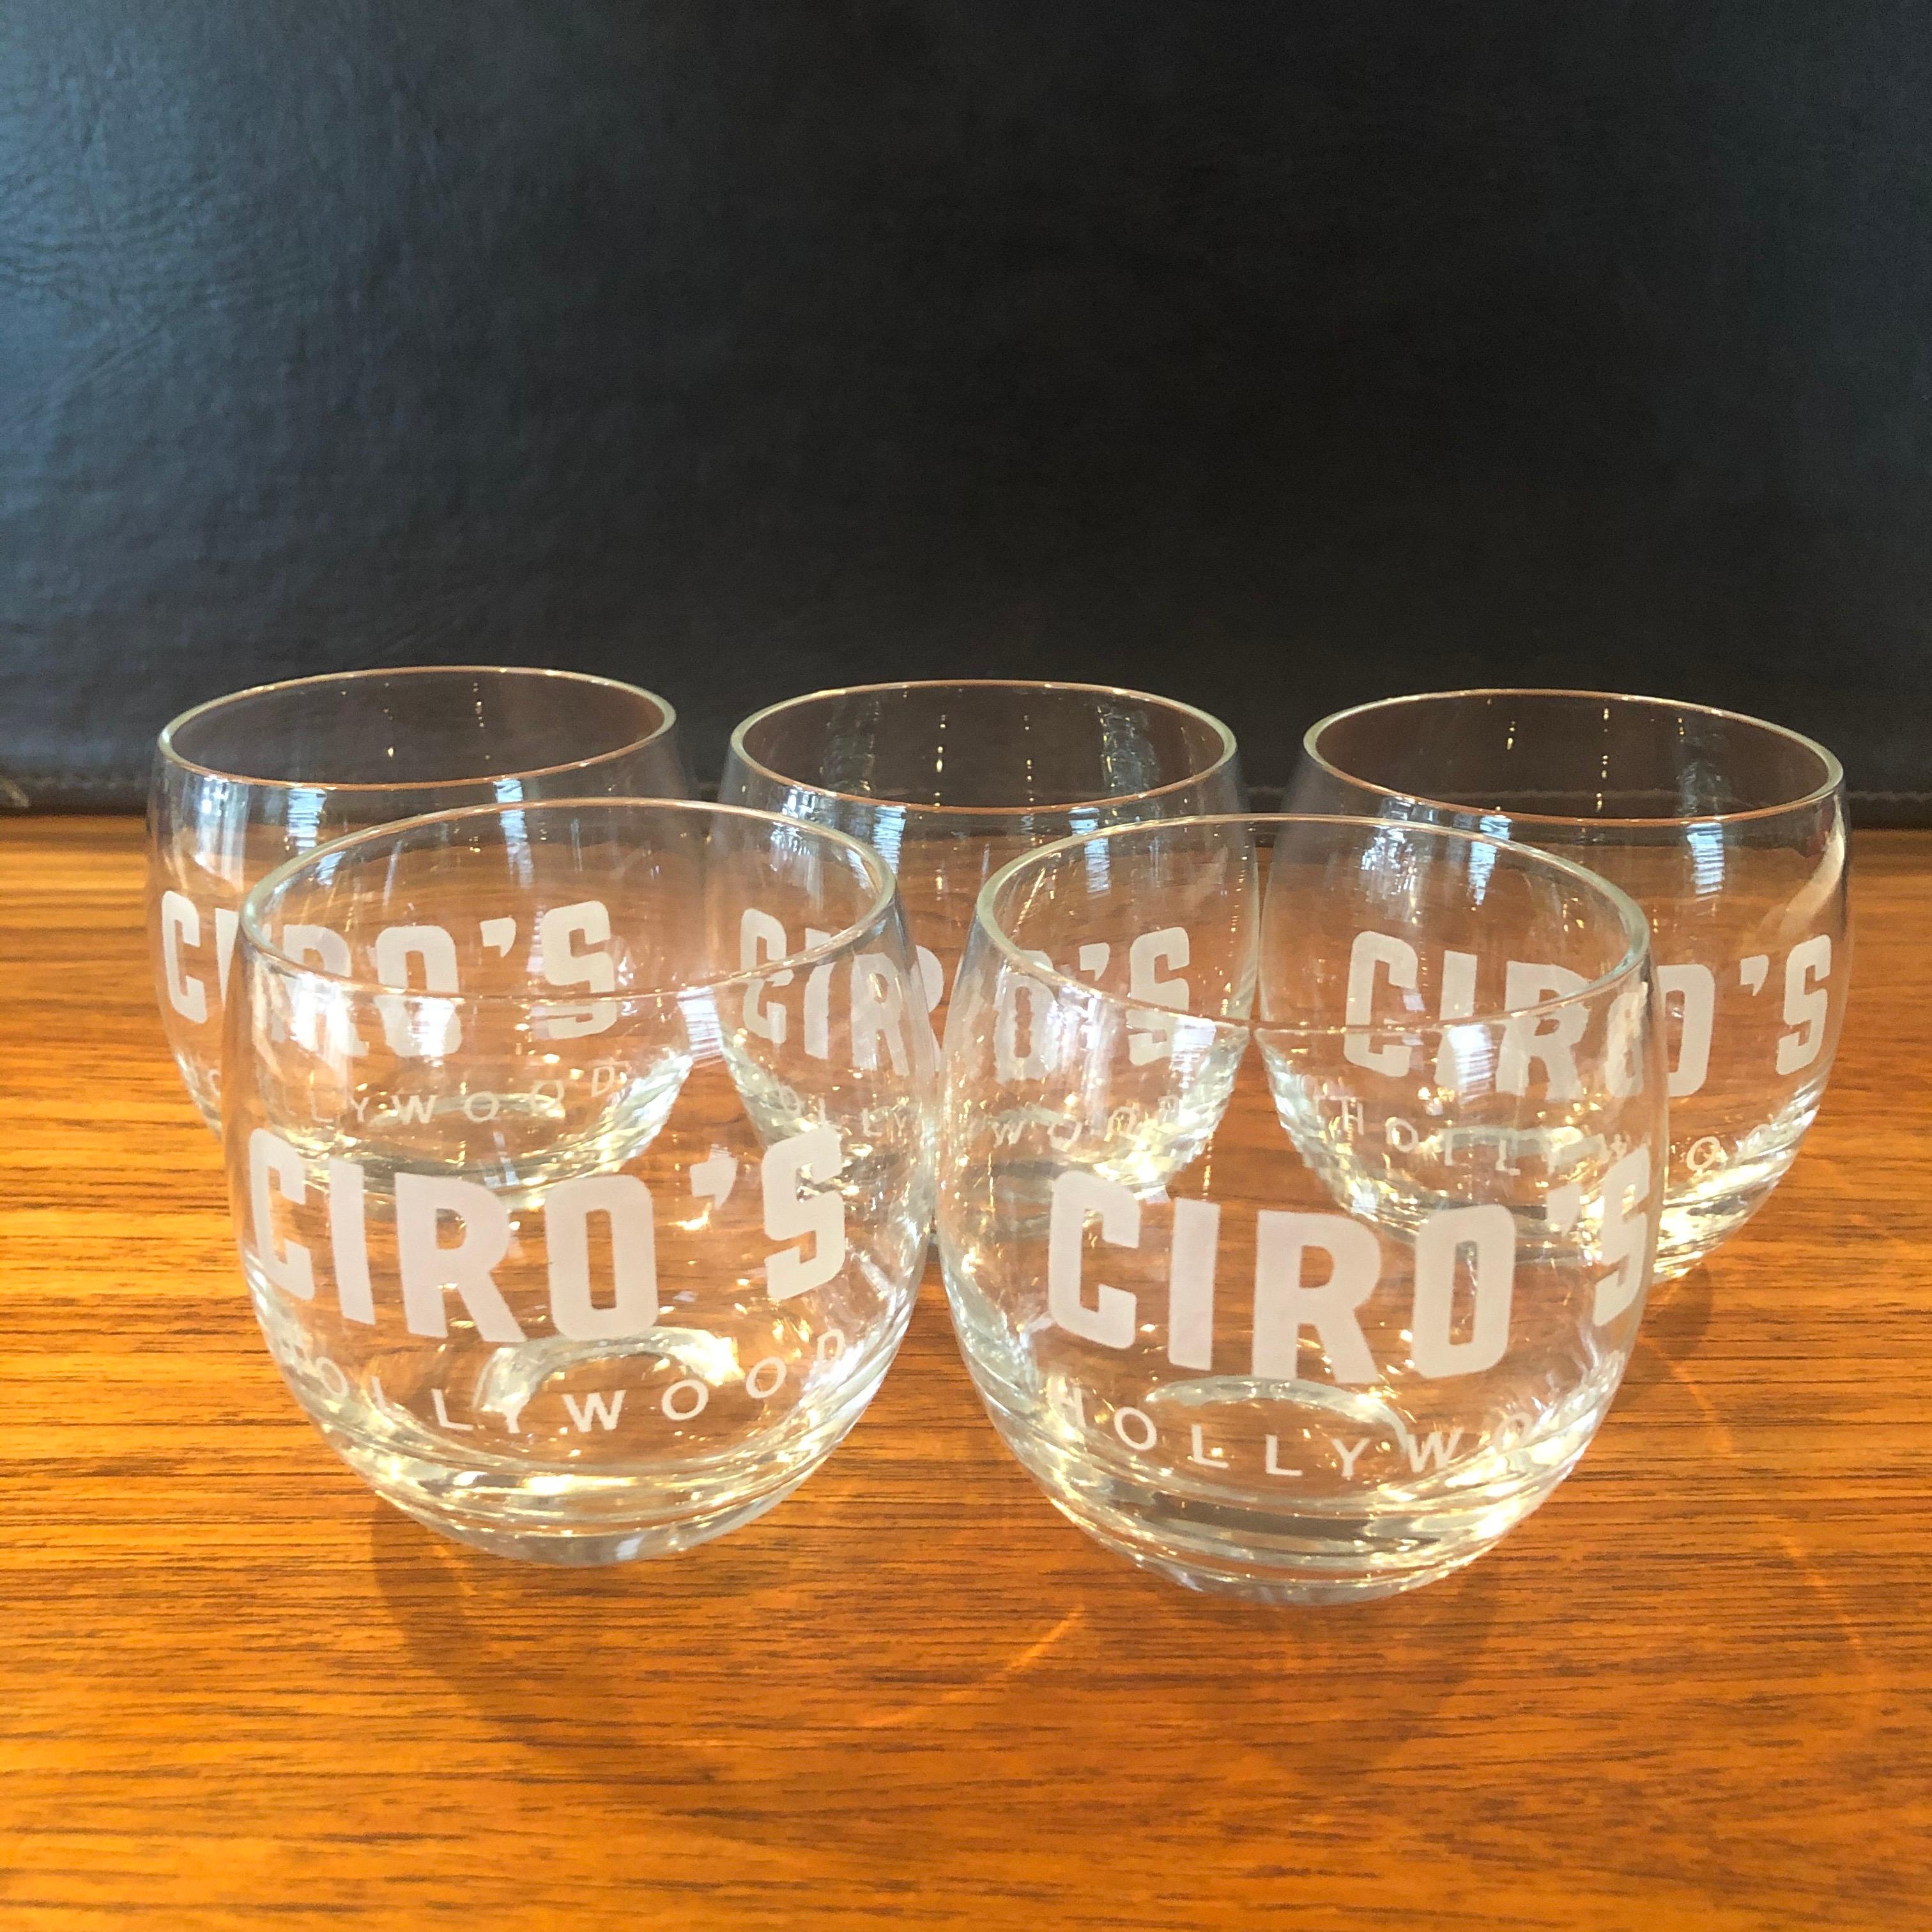 Mid-Century Modern Set of Five Double Old Fashioned Glasses '12oz' from Ciro's Hollywood Barware